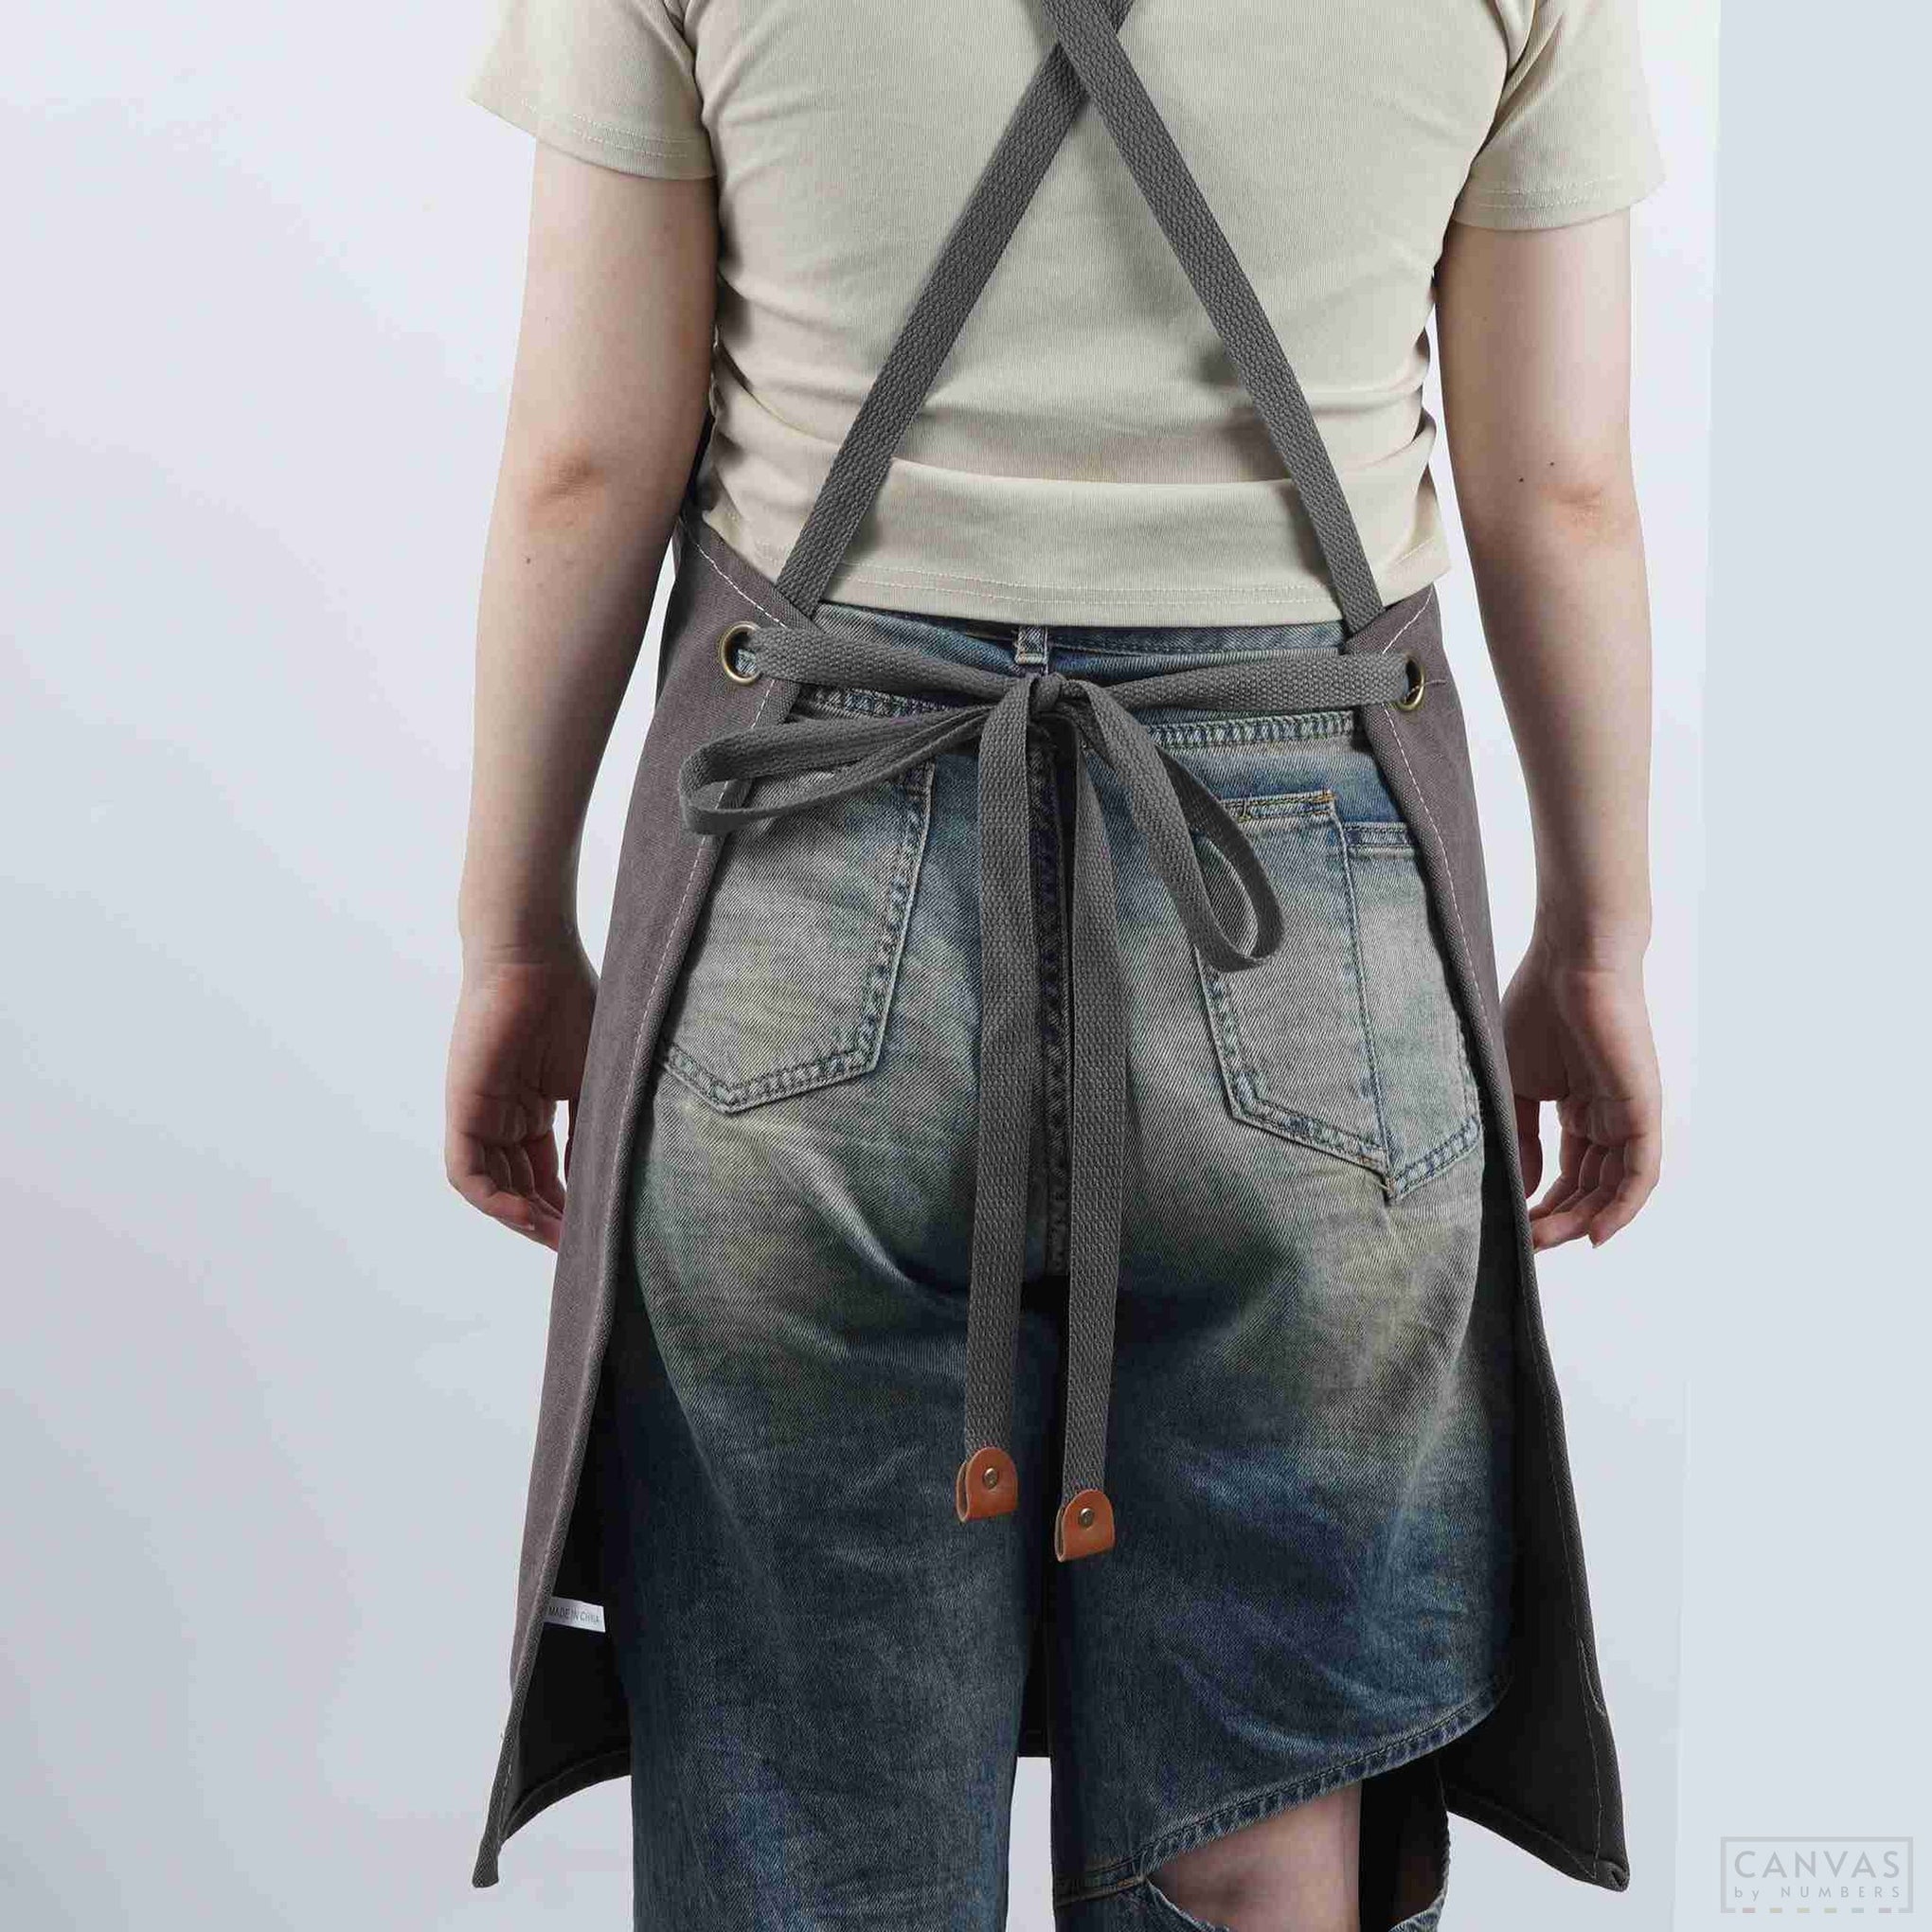 Adjustable Painting Apron Heavy Duty Canvas Artist Apron With